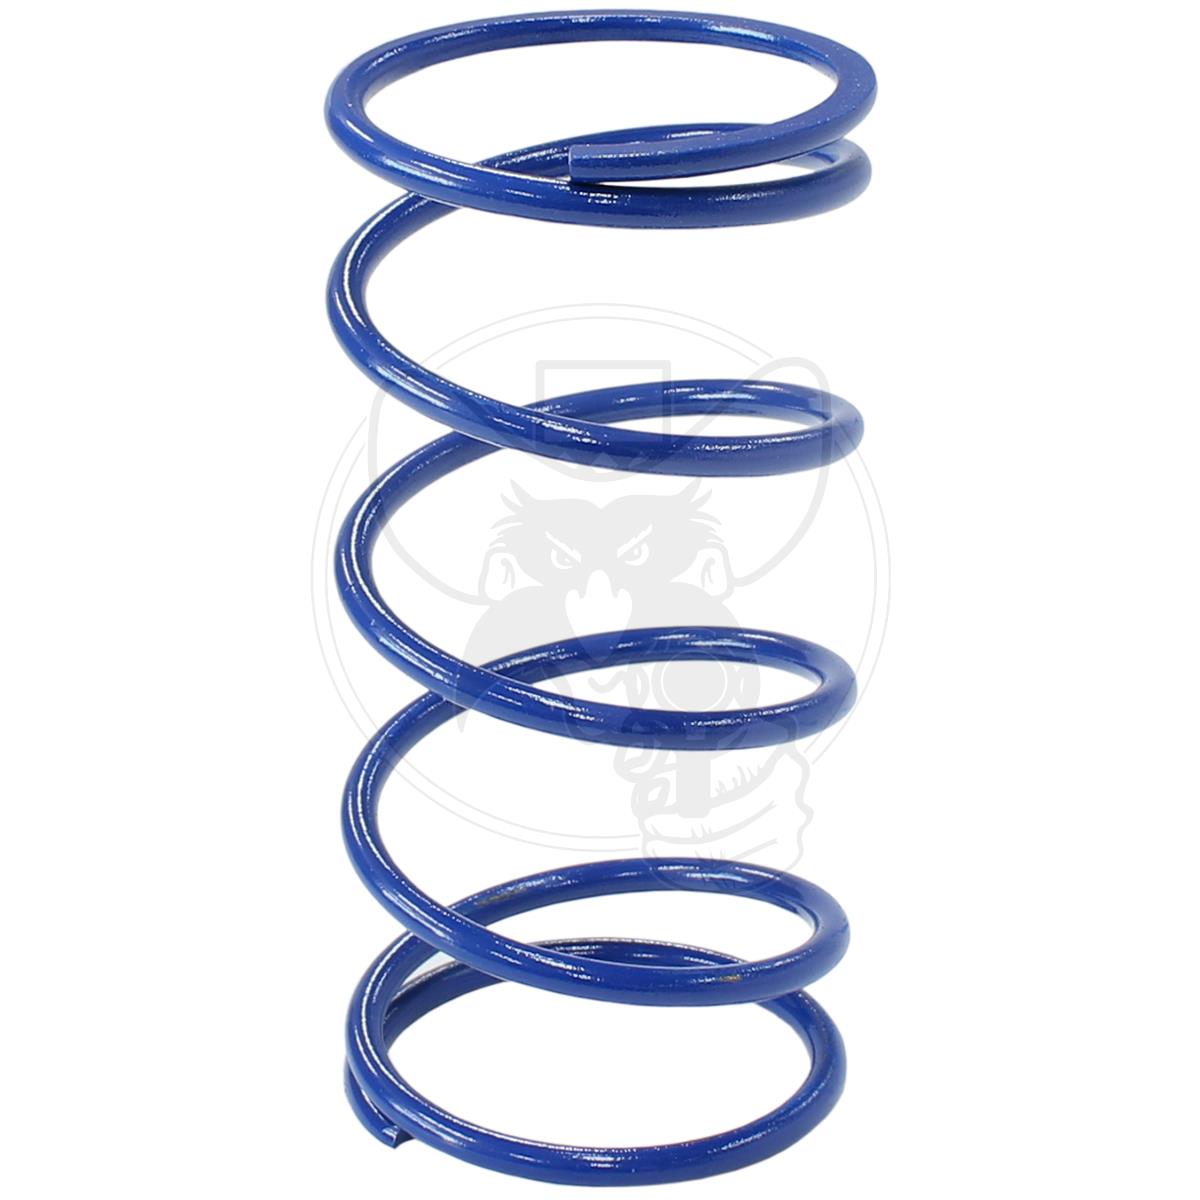 AEROFLOW WASTEGATE OUTER SPRING FROM 8.5 PSI (0.6 BAR) - BLUE